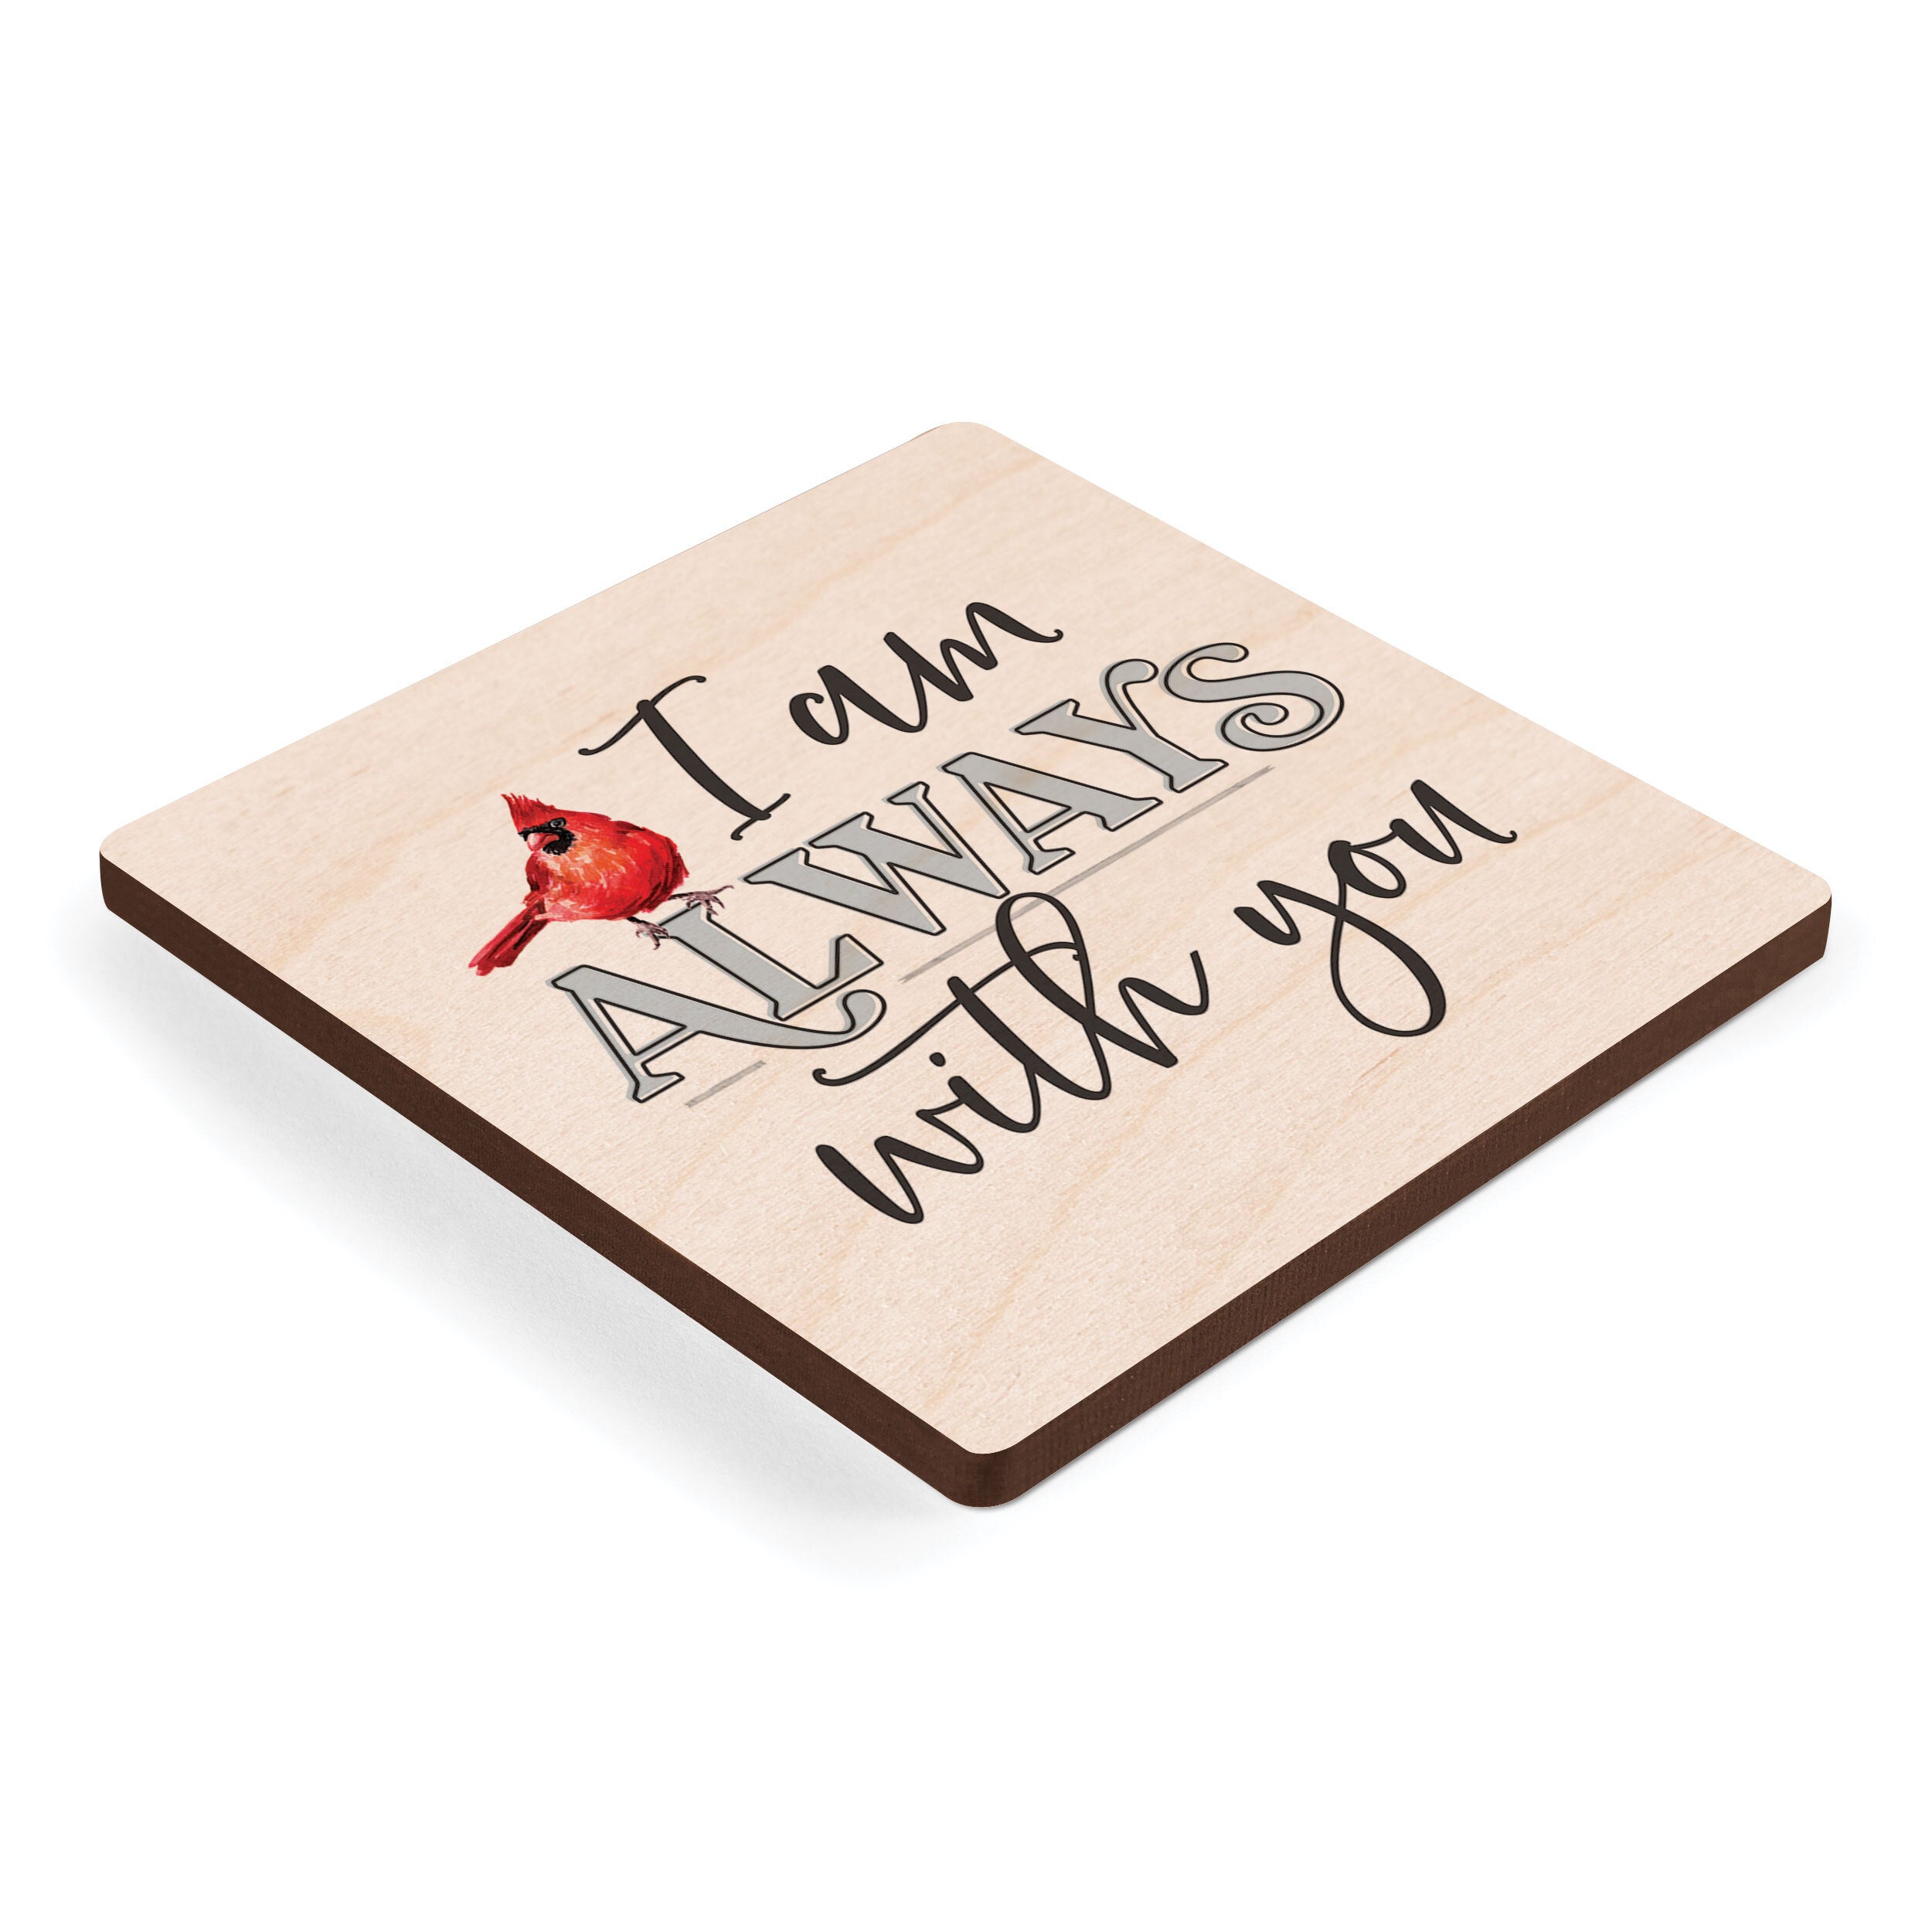 I Am Always With You Square Maple Veneer Magnet